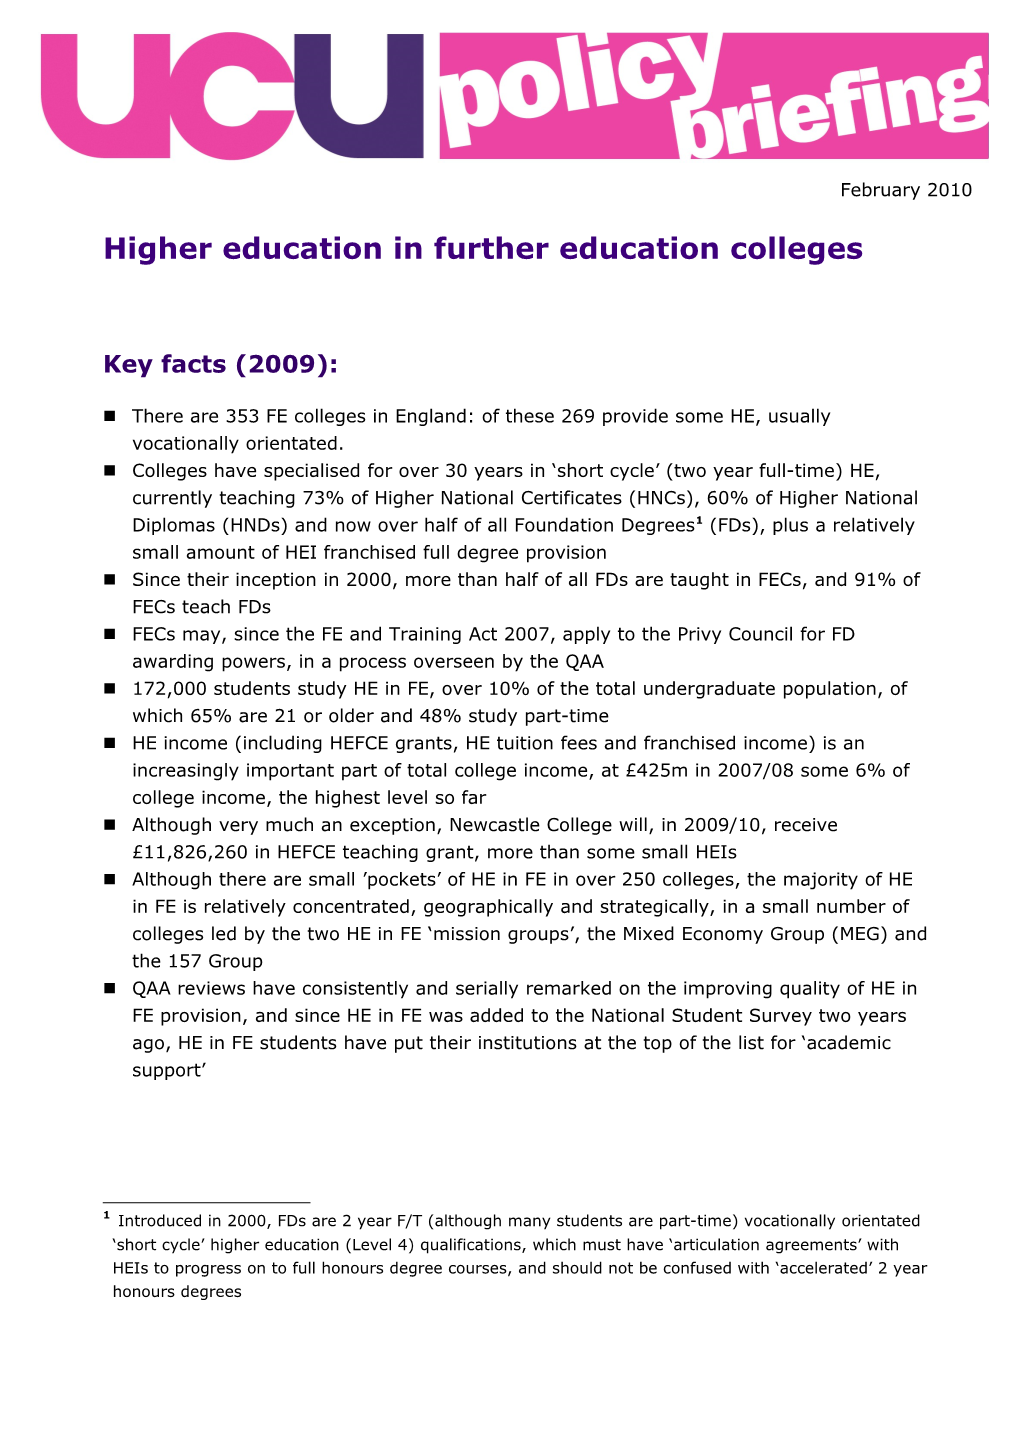 Higher Education in Further Education Colleges